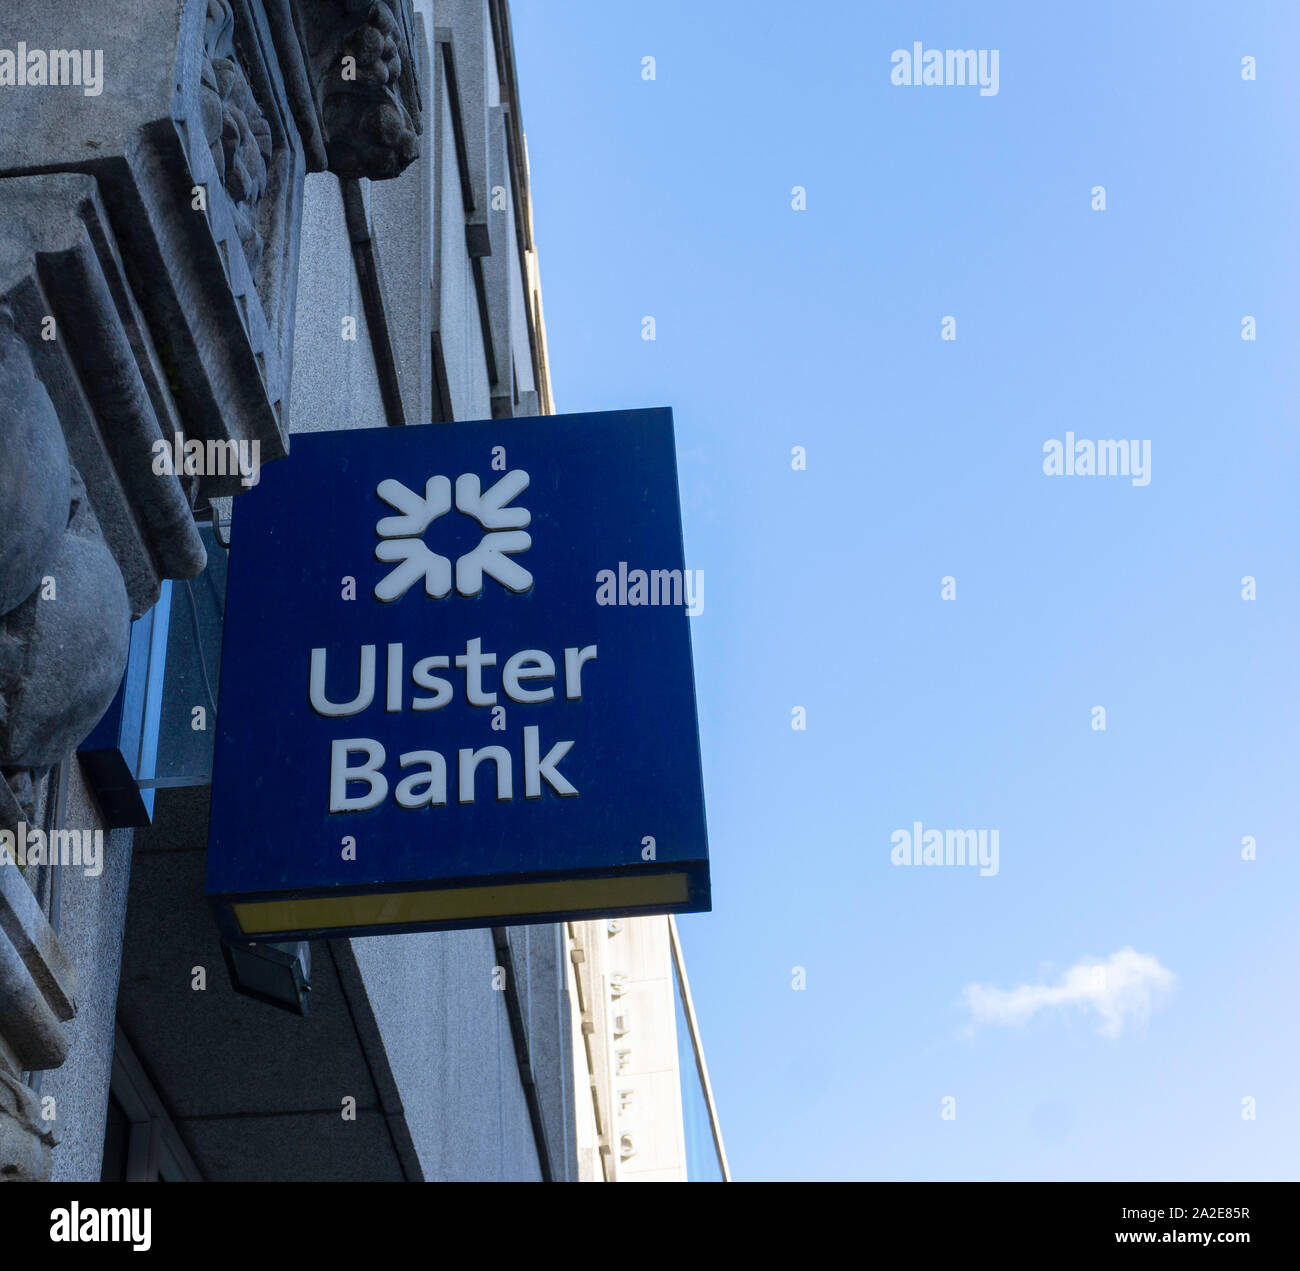 Ulster Bank, a sign/symbol for the Ulster Bank, part of The Royal Bank of Scotland Group. Stock Photo